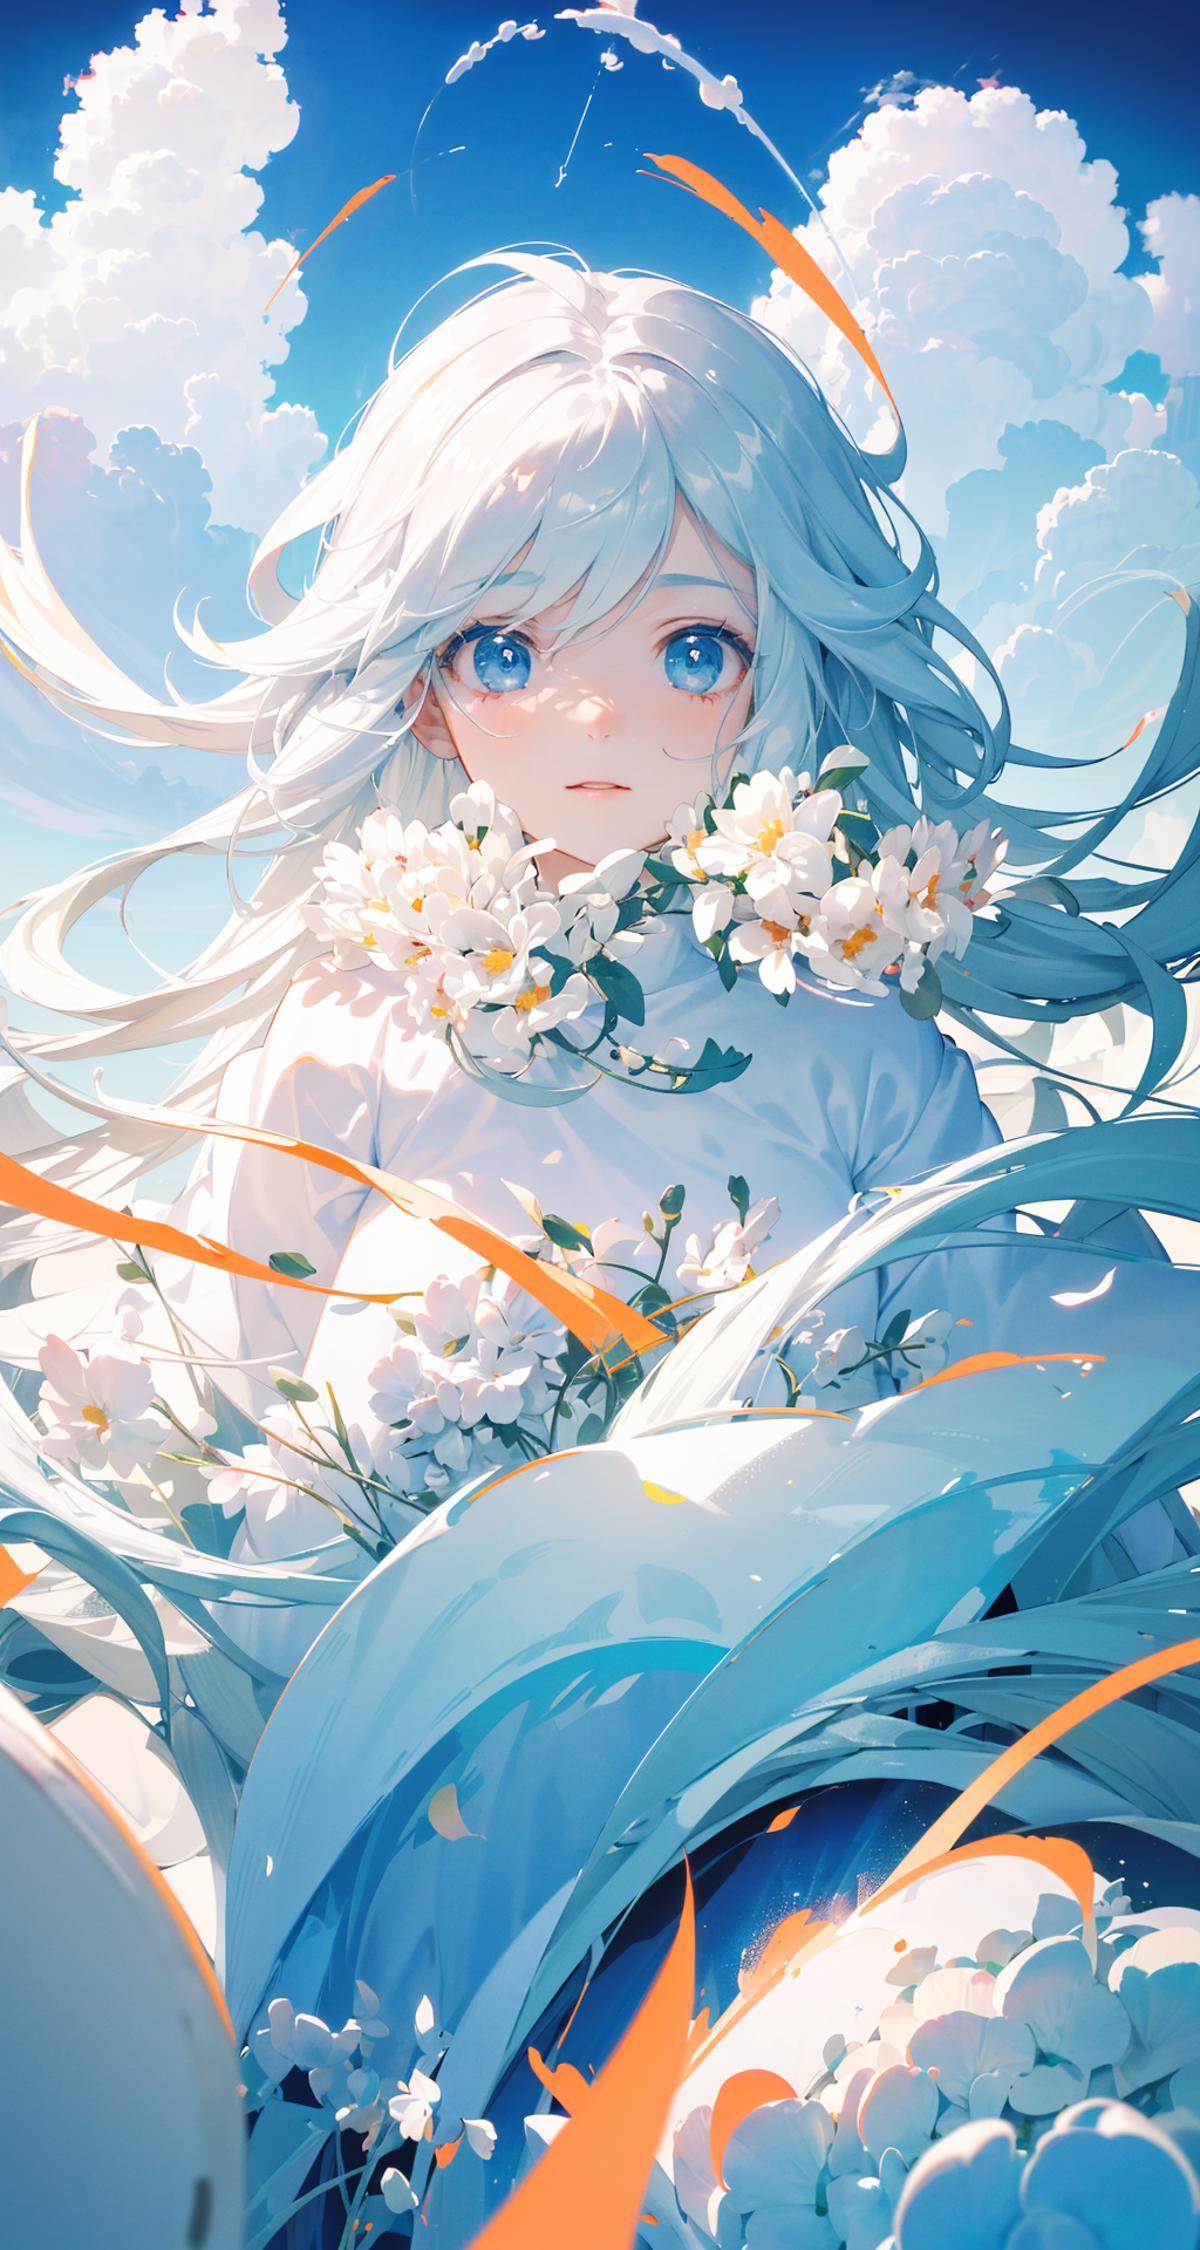 A girl with white hair and blue eyes is holding flowers in a white outfit.